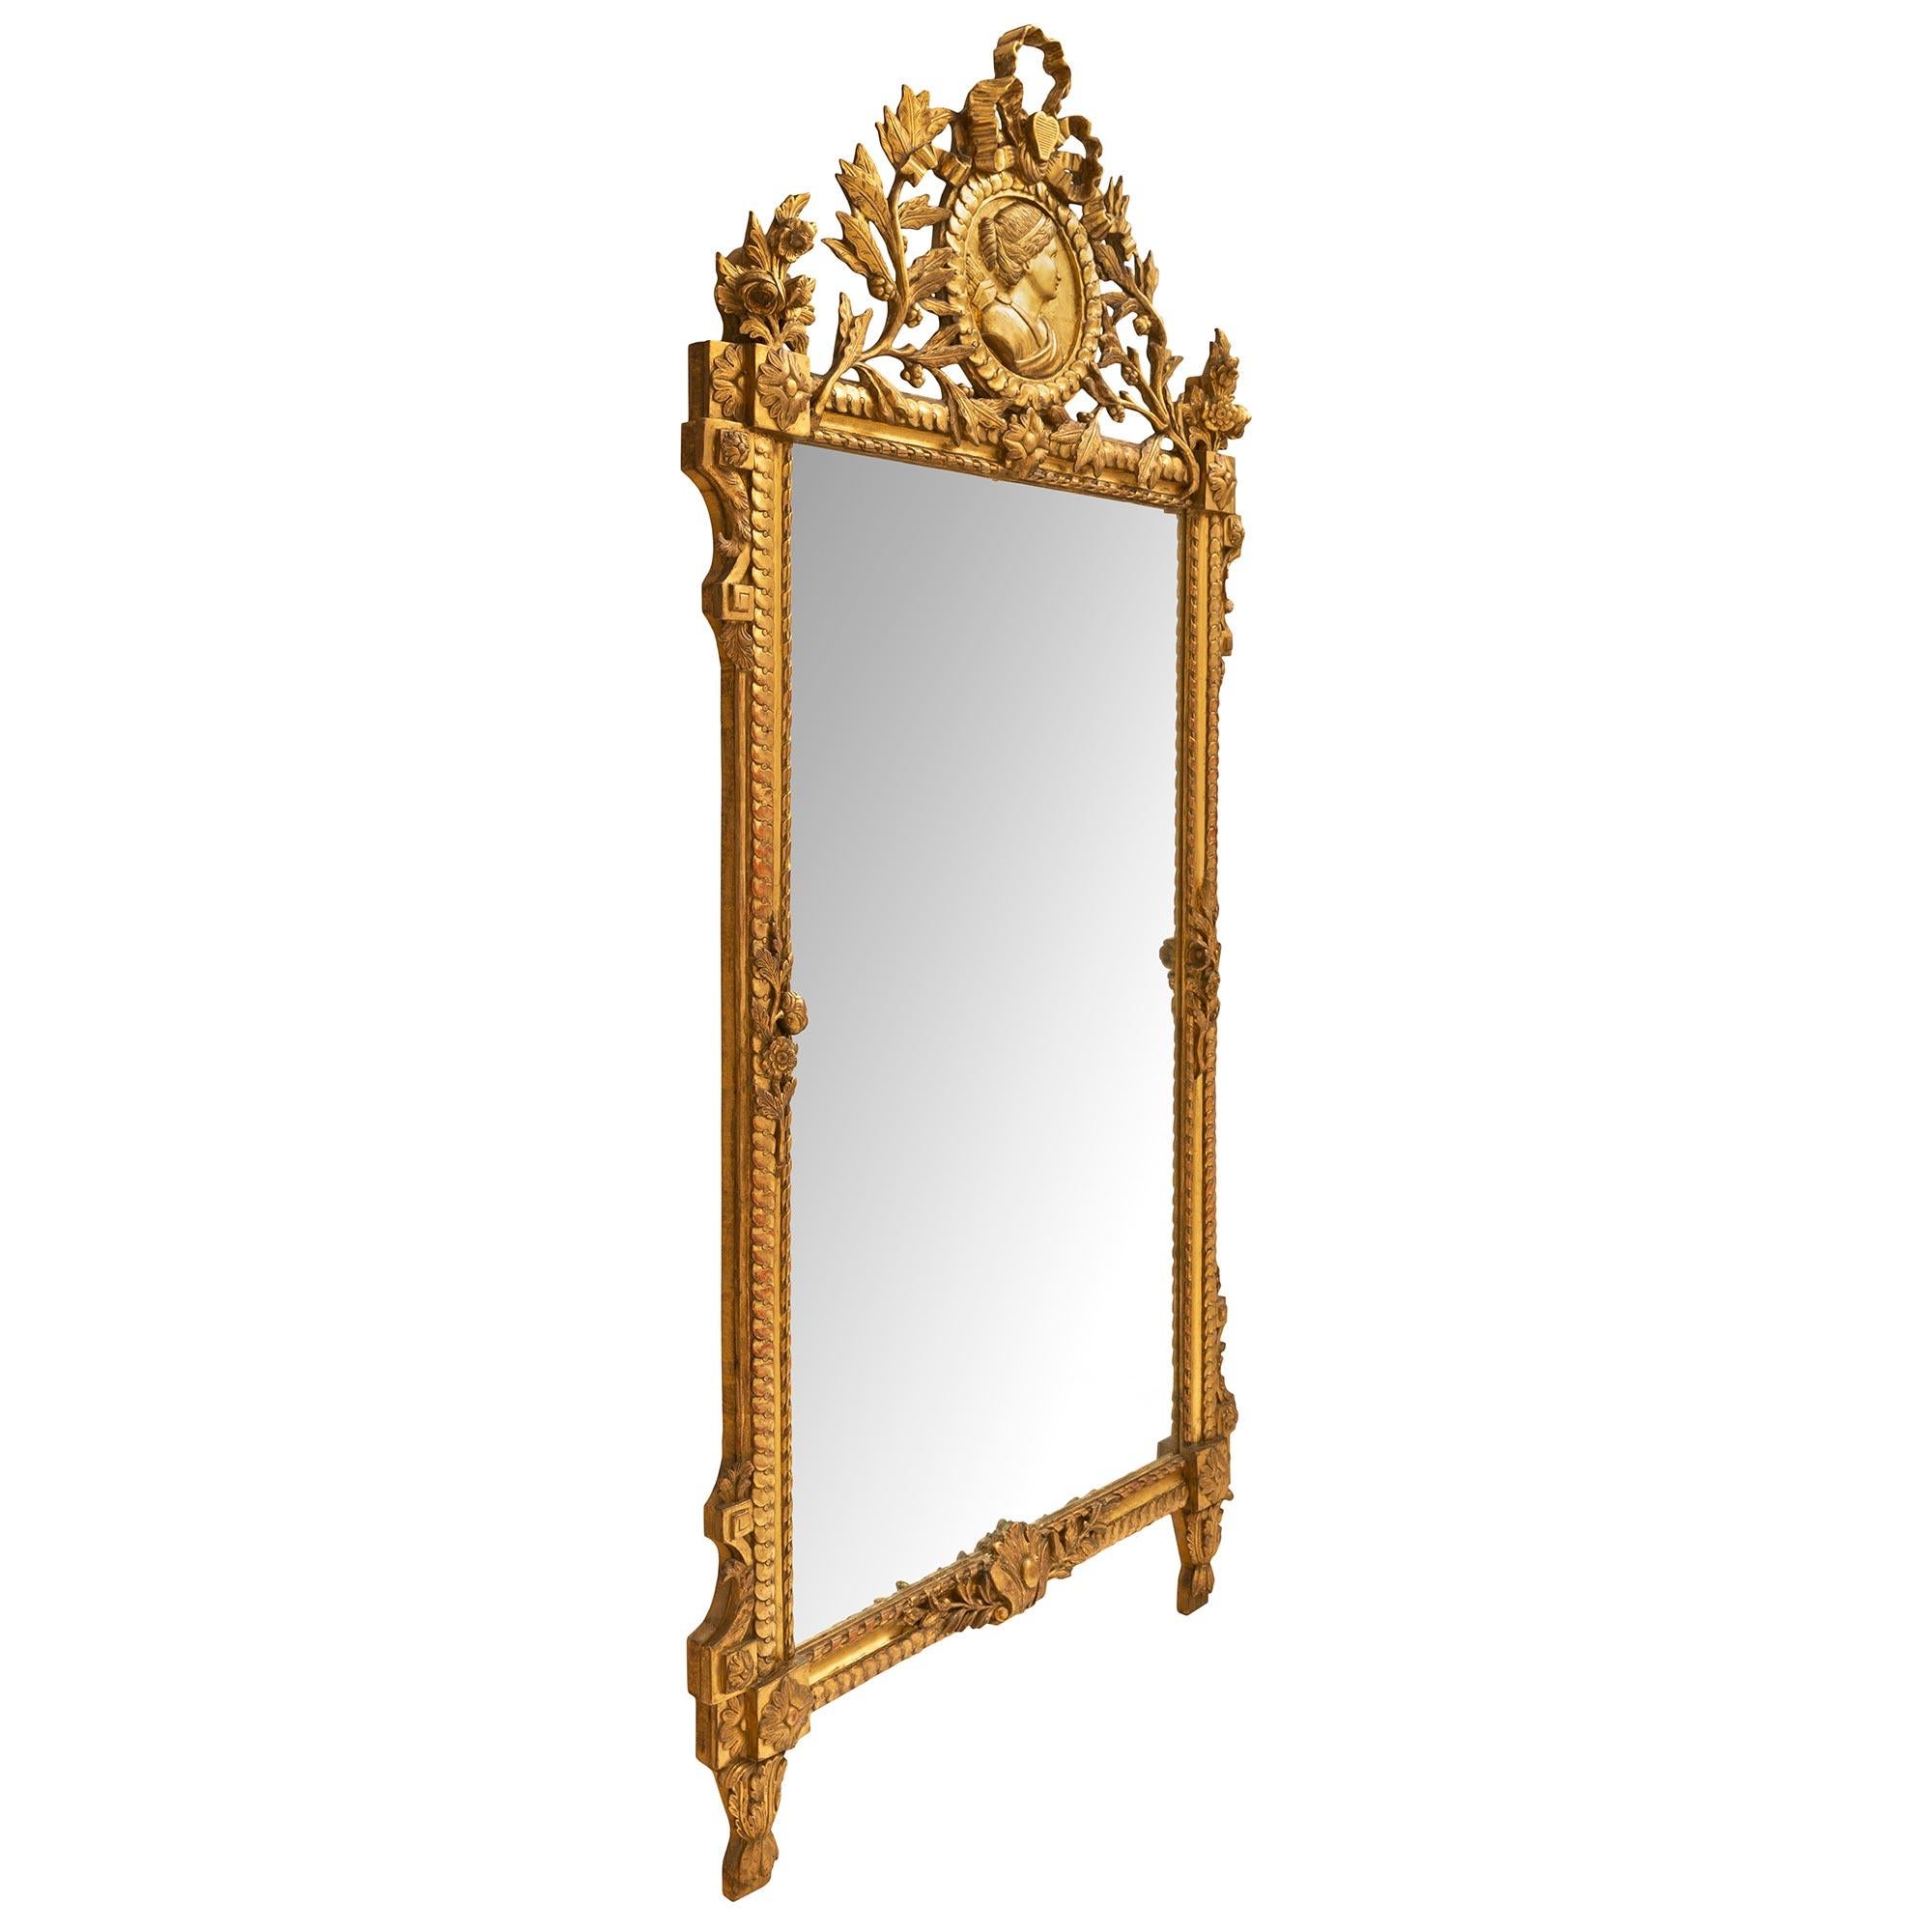 A sensational and large scale French 19th century Louis XVI st. Giltwood mirror with all original gilt and richly carved throughout. The frame with an intertwined ribbon design and twisted rope has large acanthus leaves at the bottom below rosettes.